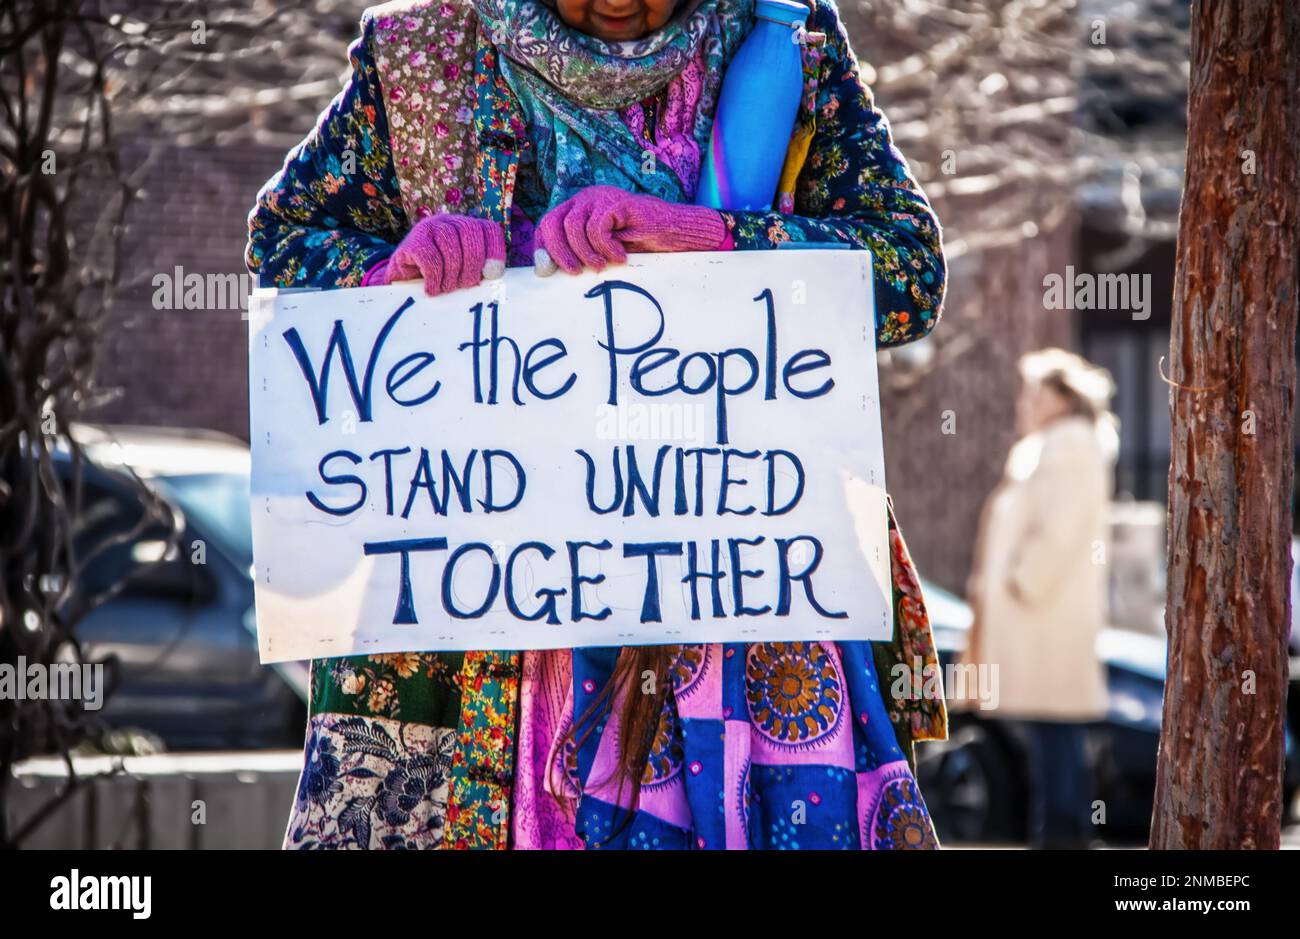 Older woman in colorful boho patchwork coat holds protest sign reading We the People stand United Together - blurred background Stock Photo